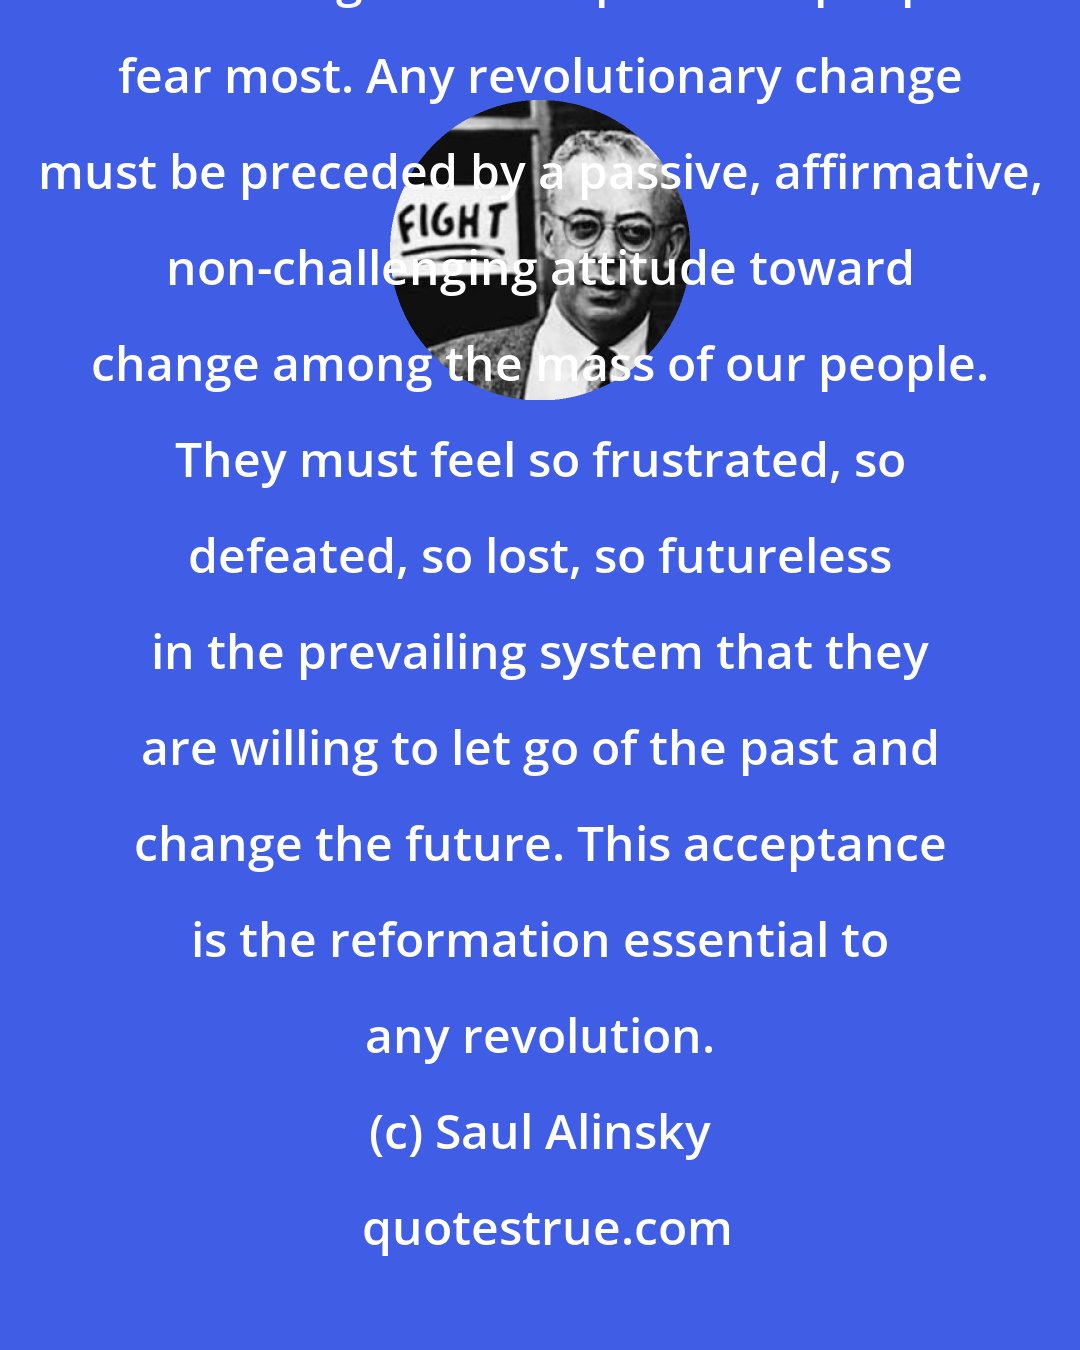 Saul Alinsky: Theres another reason for working inside the system. Dostoevsky said that taking a new step is what people fear most. Any revolutionary change must be preceded by a passive, affirmative, non-challenging attitude toward change among the mass of our people. They must feel so frustrated, so defeated, so lost, so futureless in the prevailing system that they are willing to let go of the past and change the future. This acceptance is the reformation essential to any revolution.